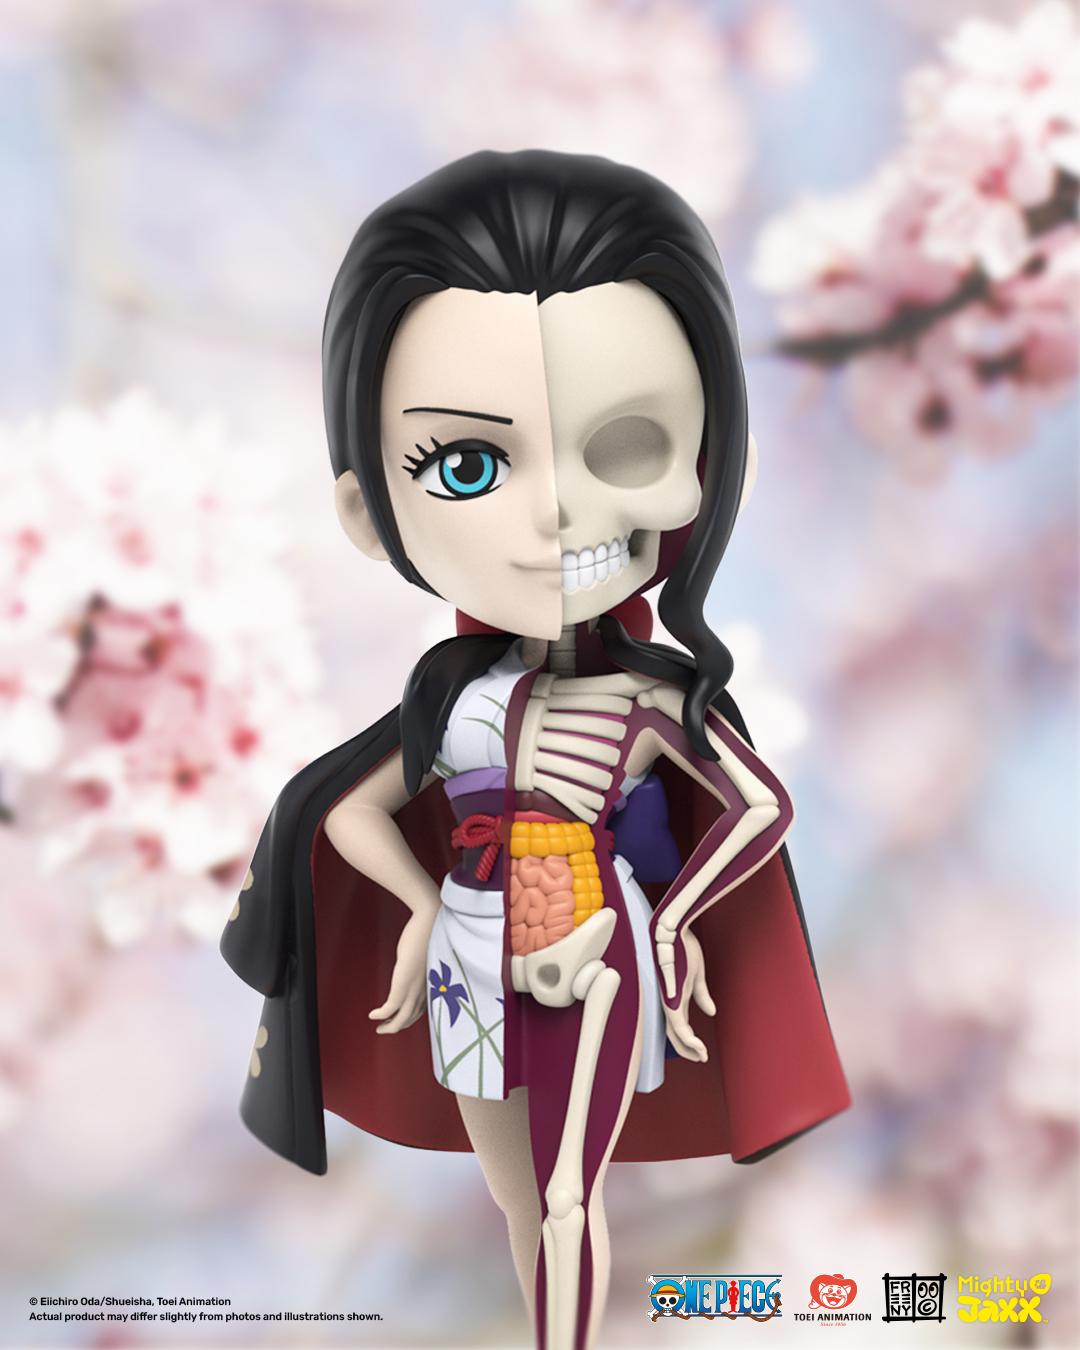 A picture containing anime, doll, toy, cartoon

Description automatically generated